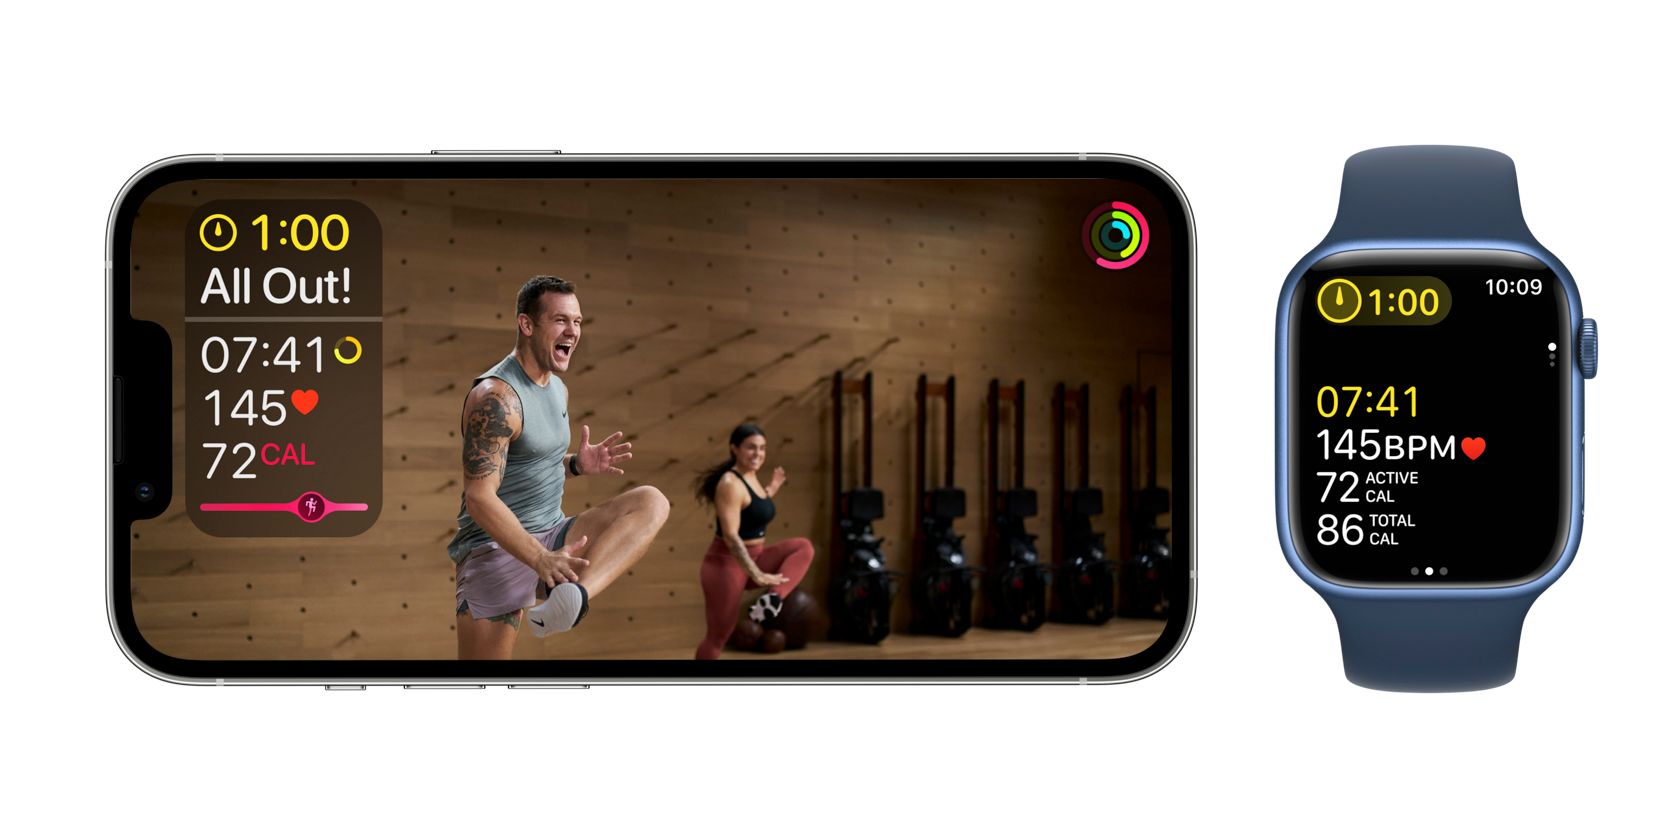 Apple Fitness+ Workout shown on iPhone and Apple Watch